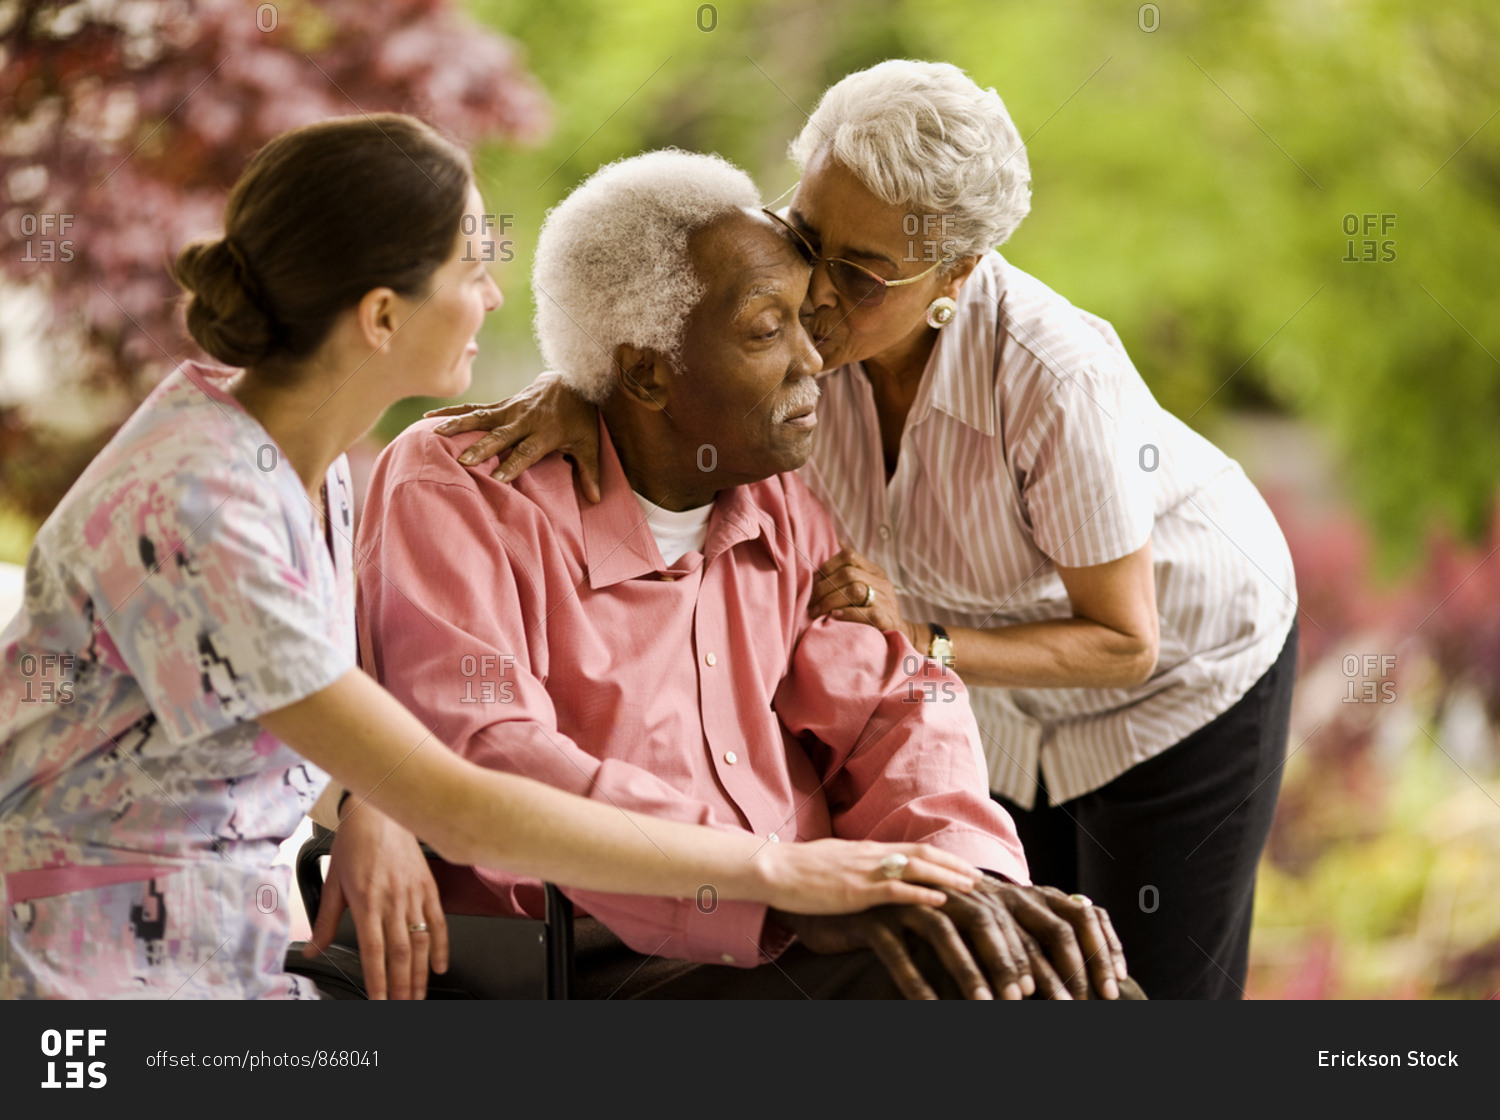 Nurse puts supportive hand on a senior man's knee as a senior woman leans down to hug him and kiss his forehead.